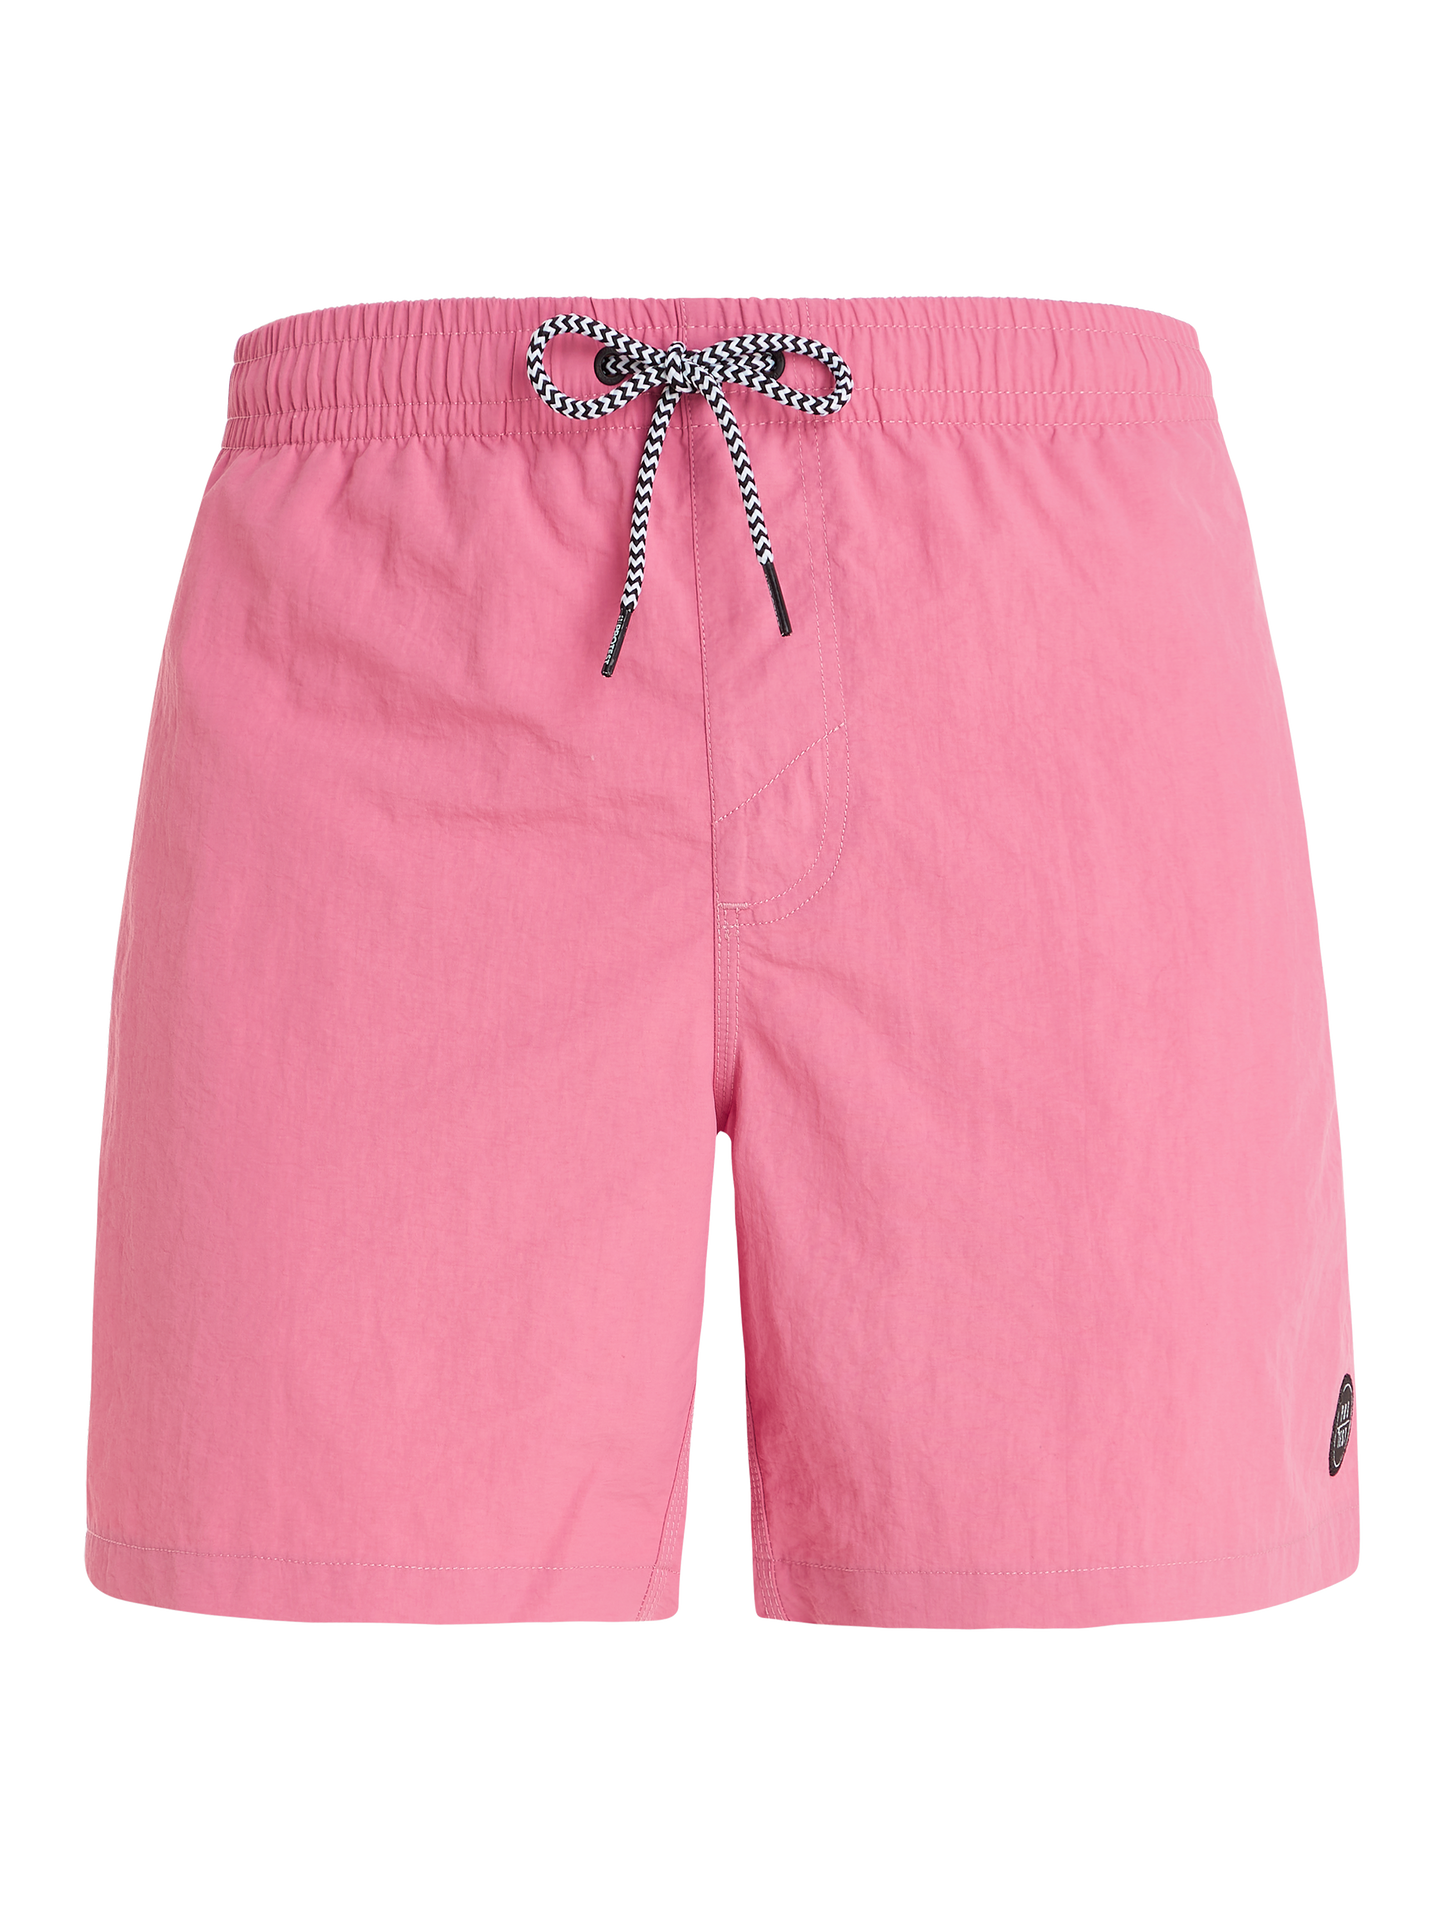 Protest Faster Swim Shorts in Dusk Sky Pink